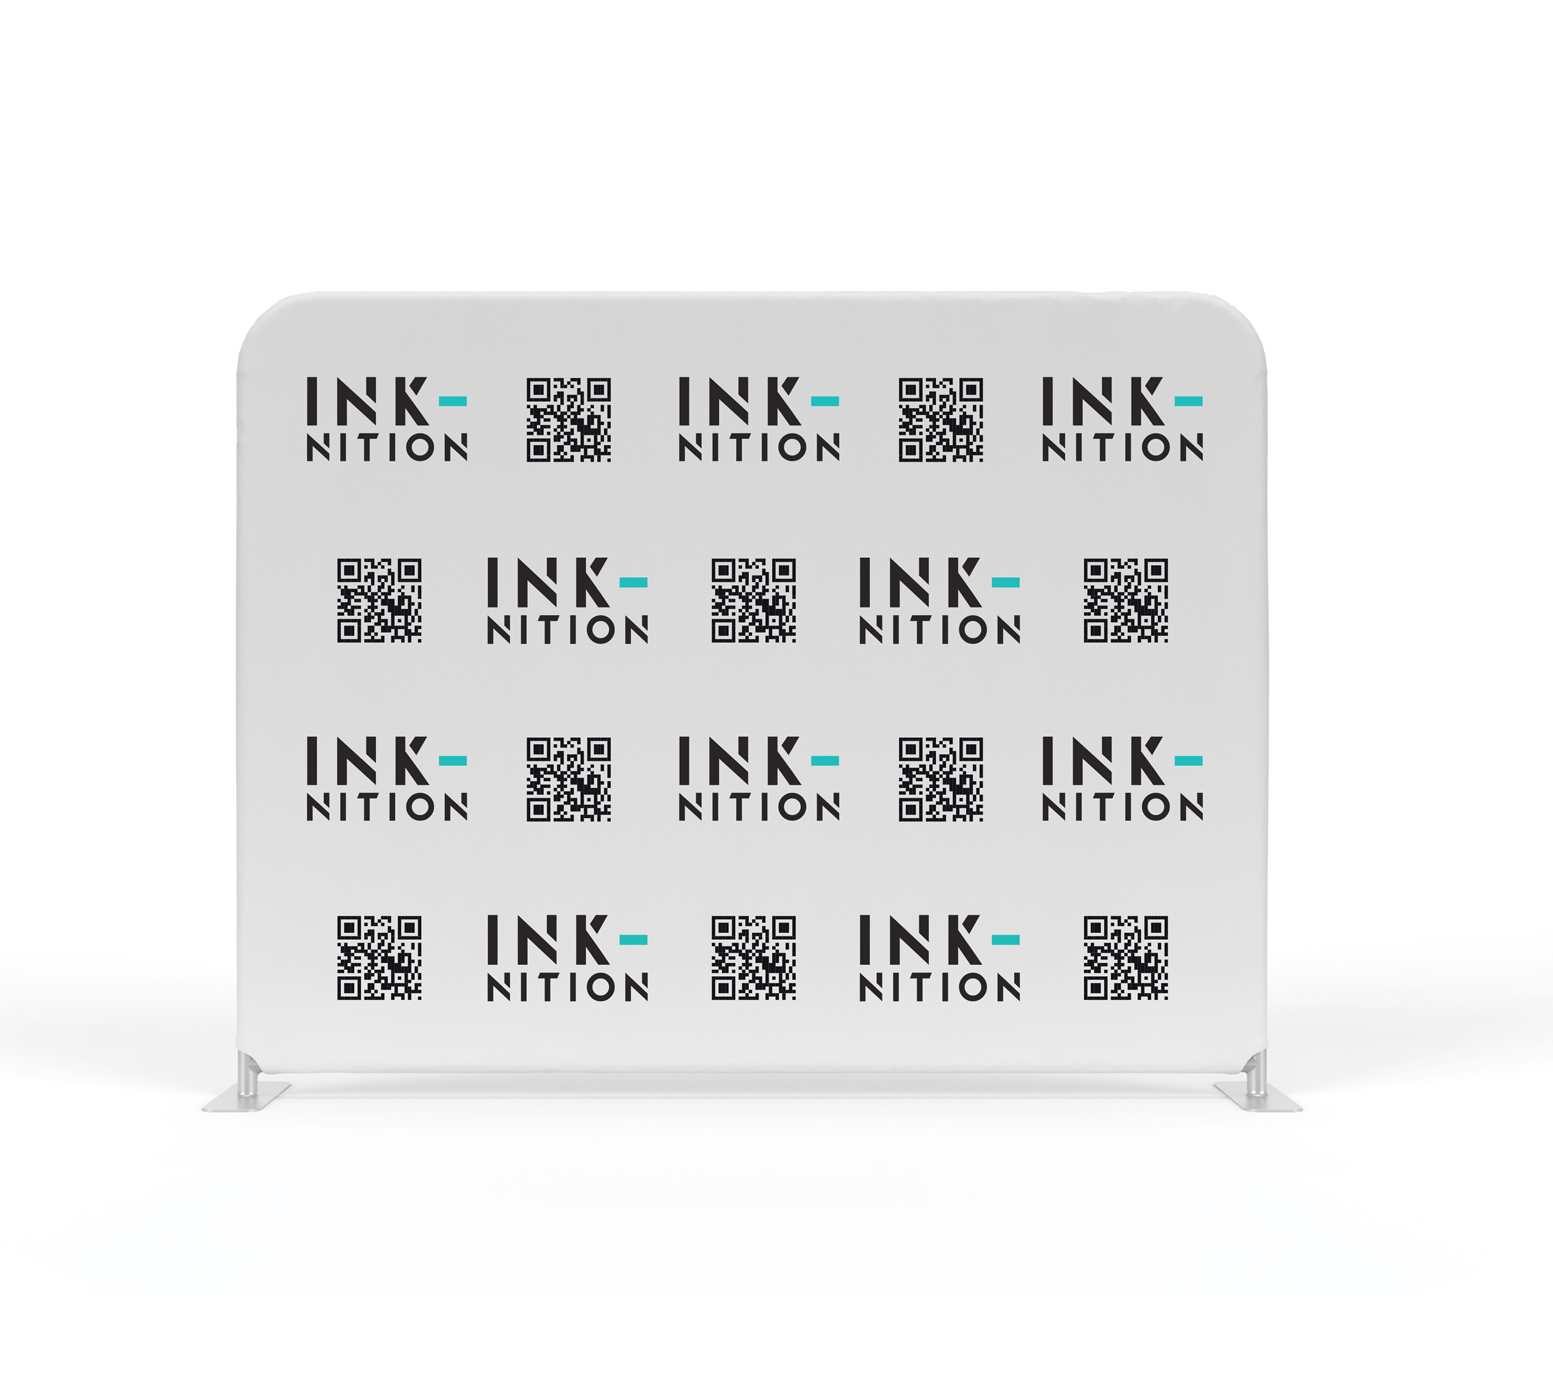 Stretch-Fabric-Media-Wall-Step-and-Repeat-logo-and-QR-code-mobile